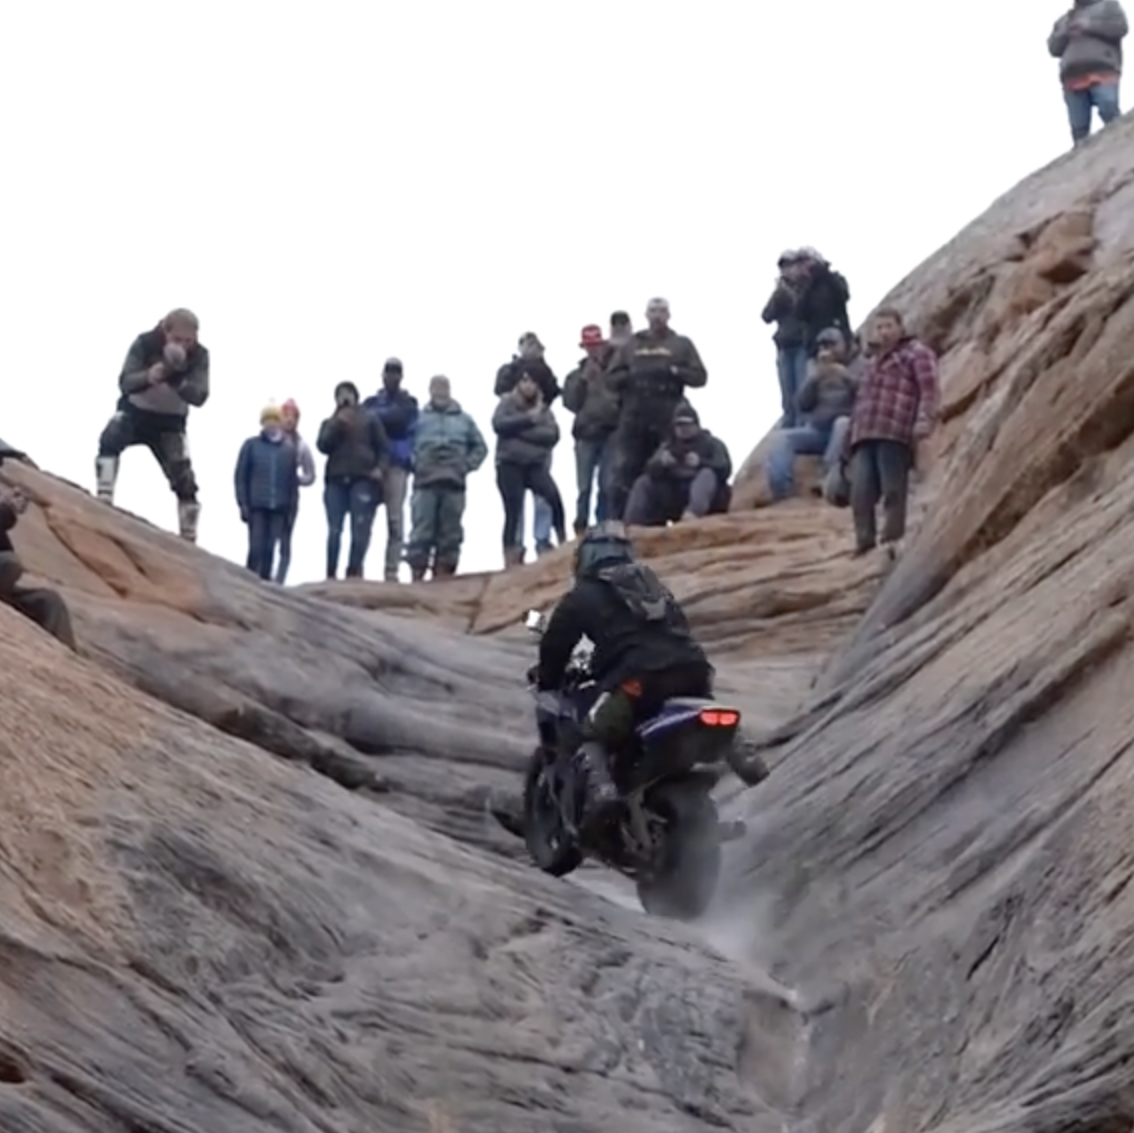 Watch in Disbelief as a Yamaha R6 Superbike Climbs Hell's Gate